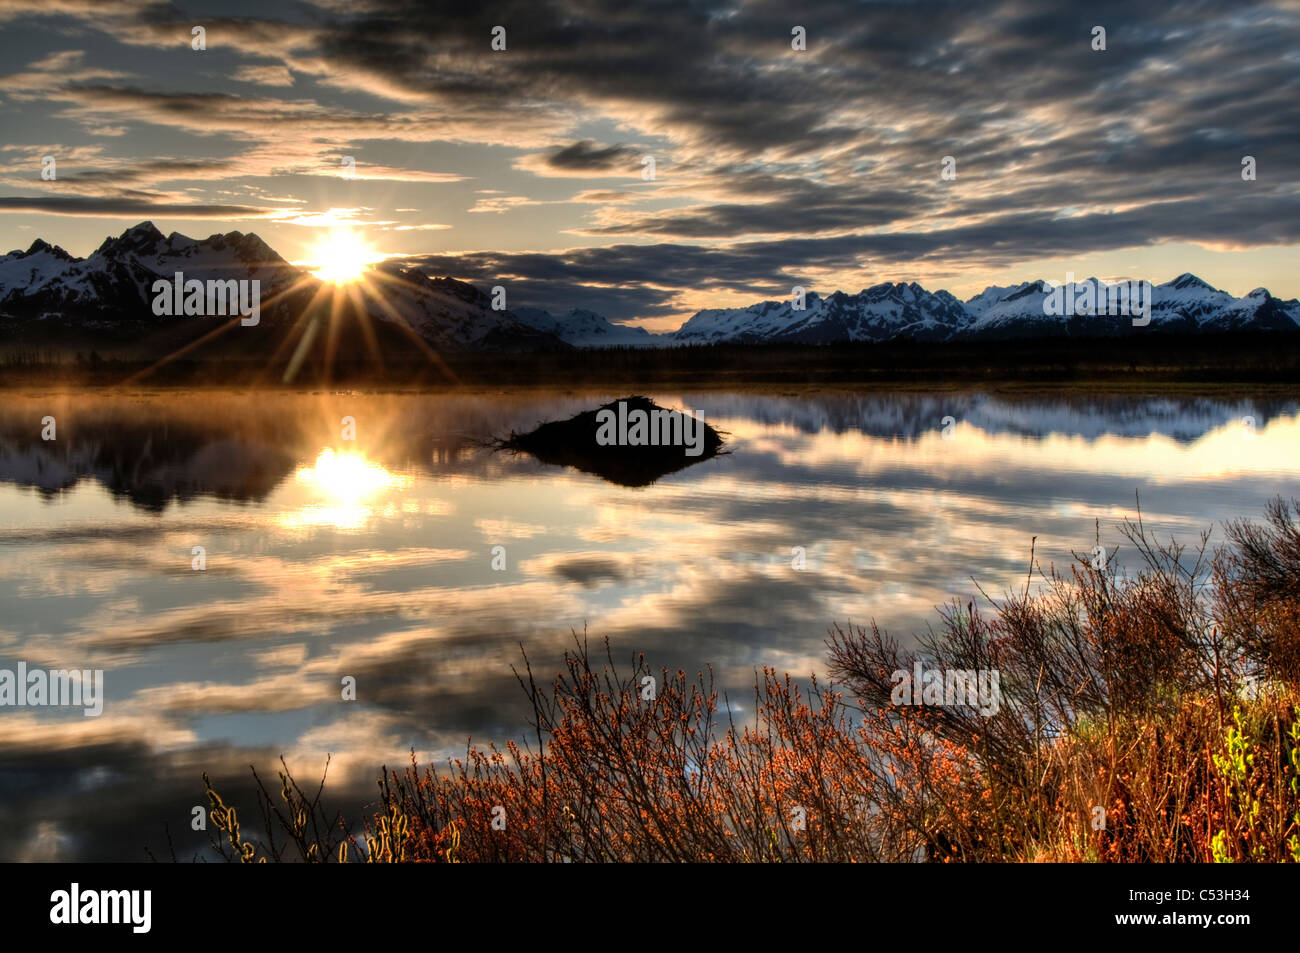 Sun rises over the Chugach Mountains with a pond and beaver lodge in the foreground, Chugach National Forest, Alaska Stock Photo